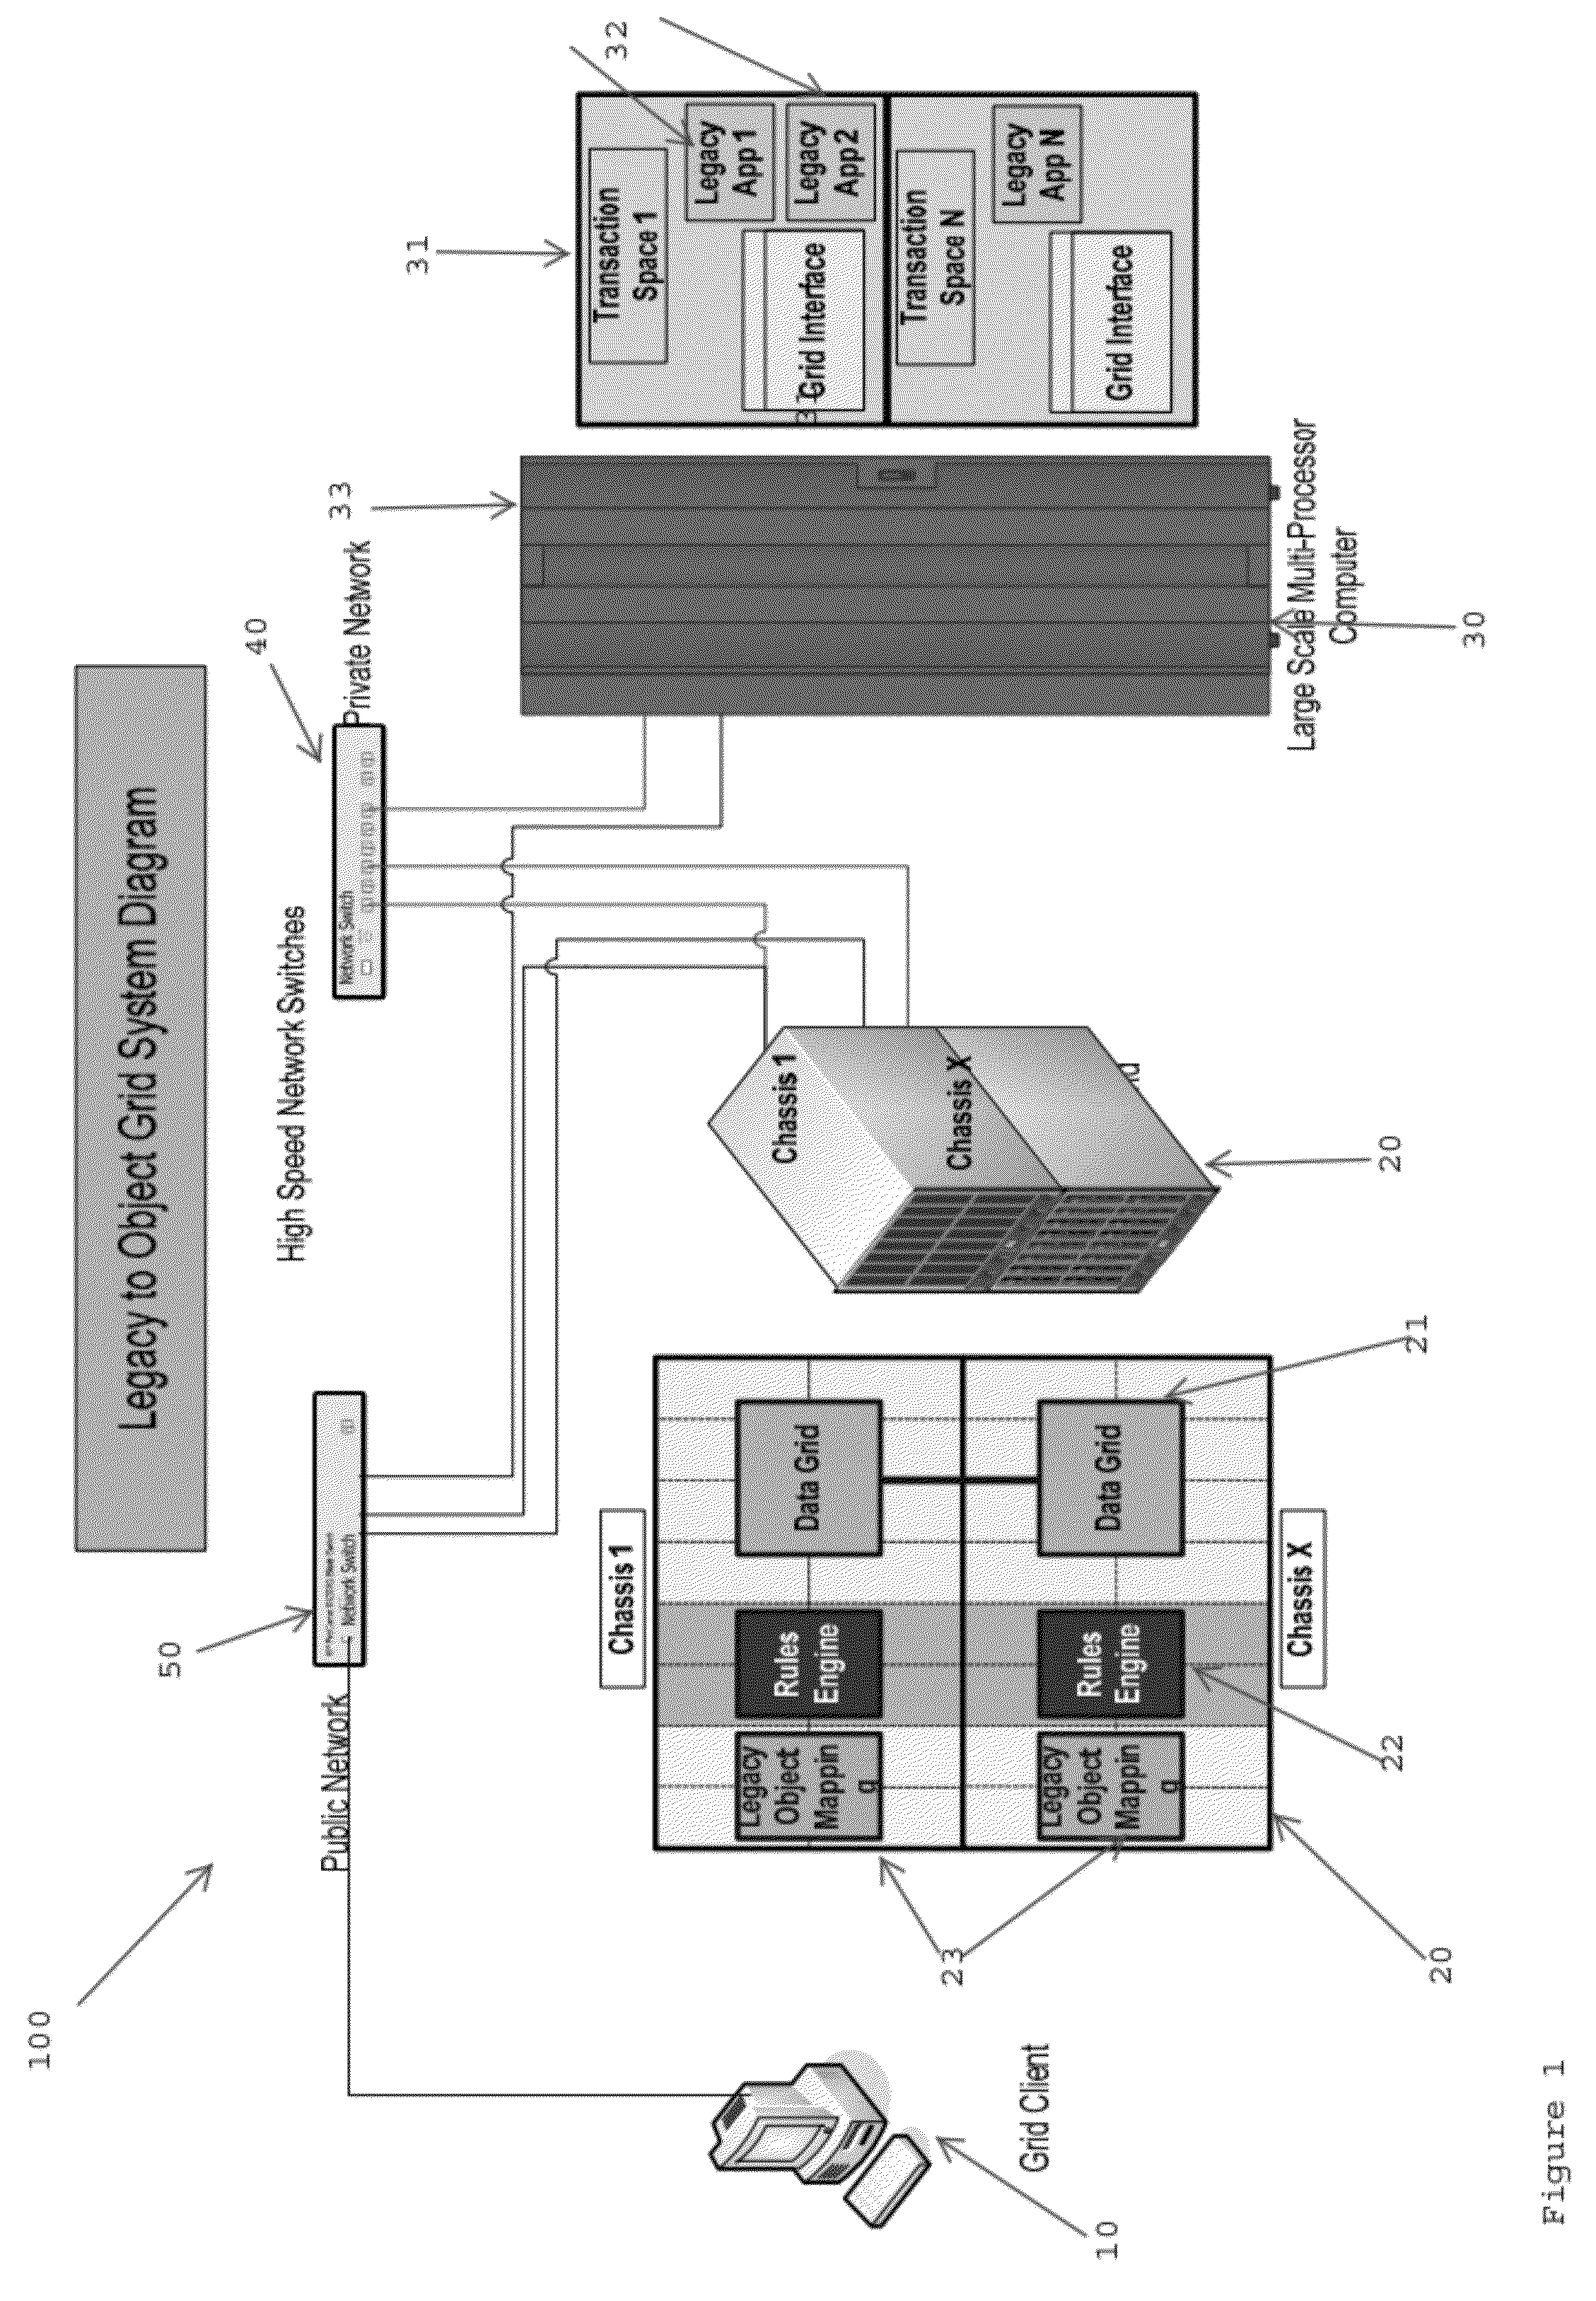 Method and system for safely transporting legacy data to an object semantic form data grid